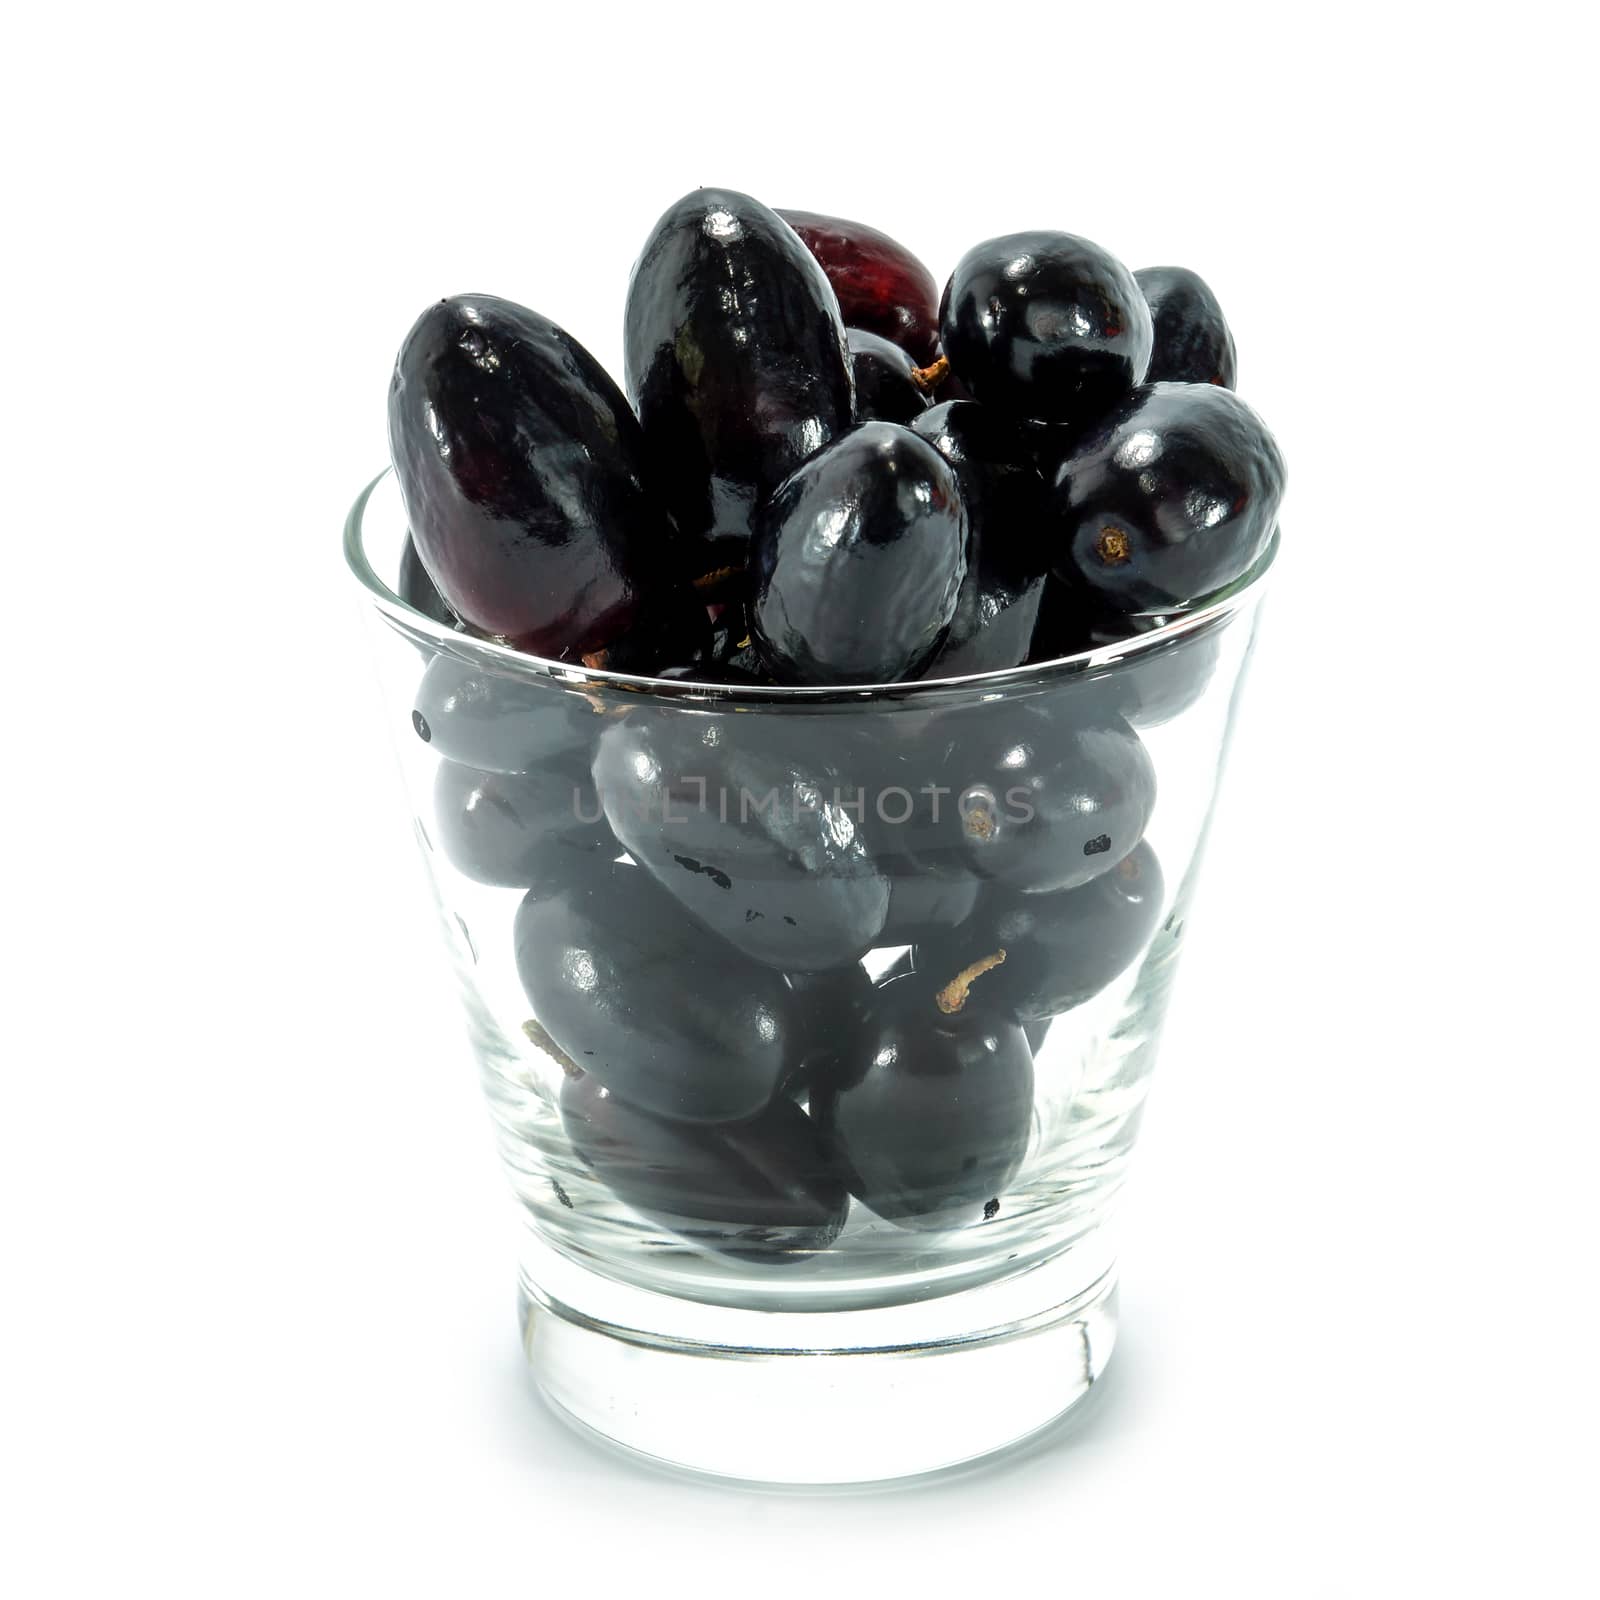 Black grapes in a glass isolated on a white background. by Noppharat_th